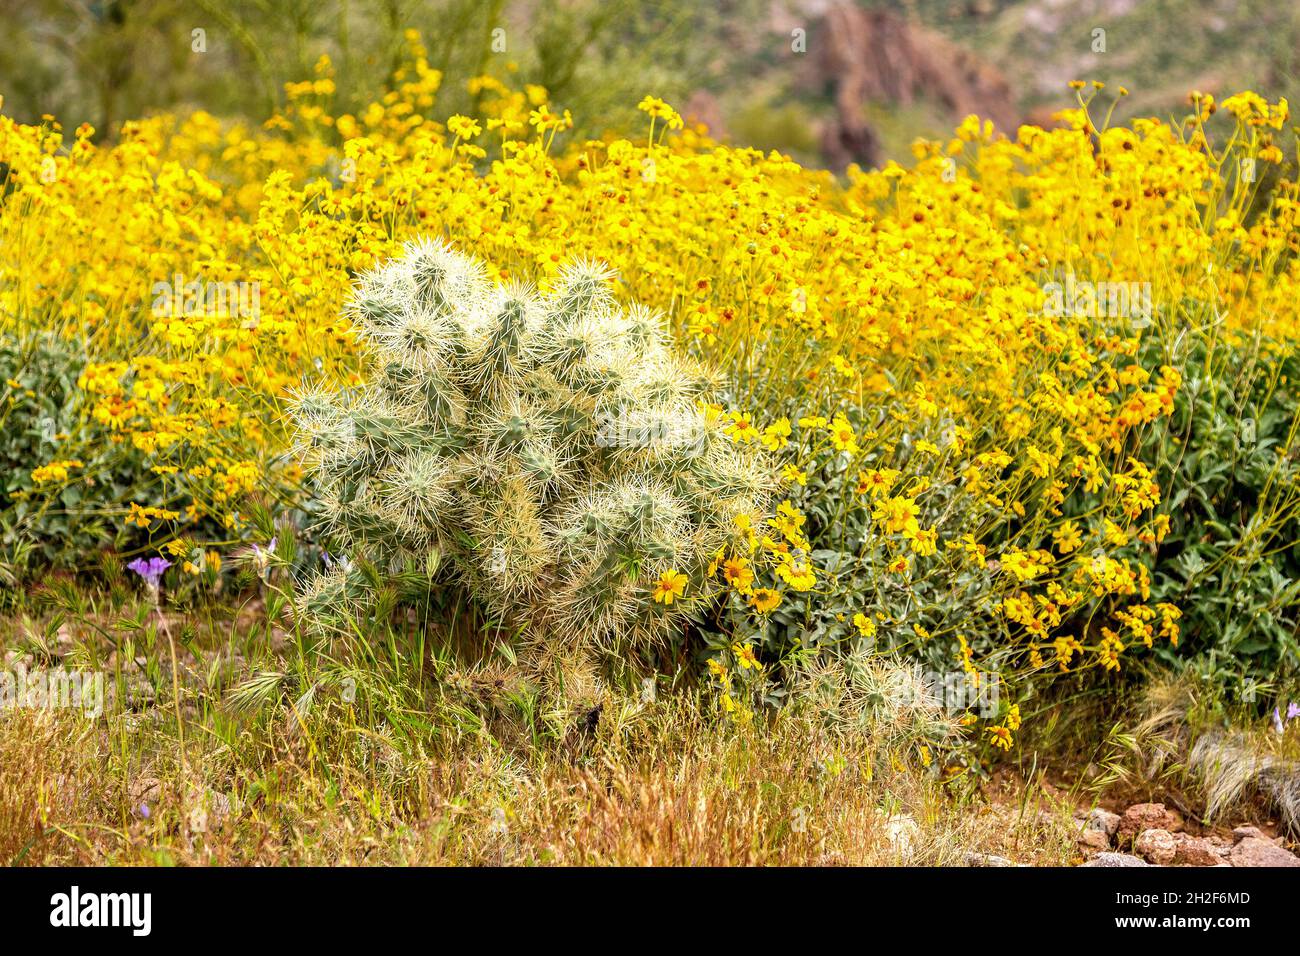 Yellow Brittlebush in Bloom and Jumping Cholla Plant in the Desert Spring. Colorful springtime yellow wildflowers blooming and cactus in AZ desert. Stock Photo